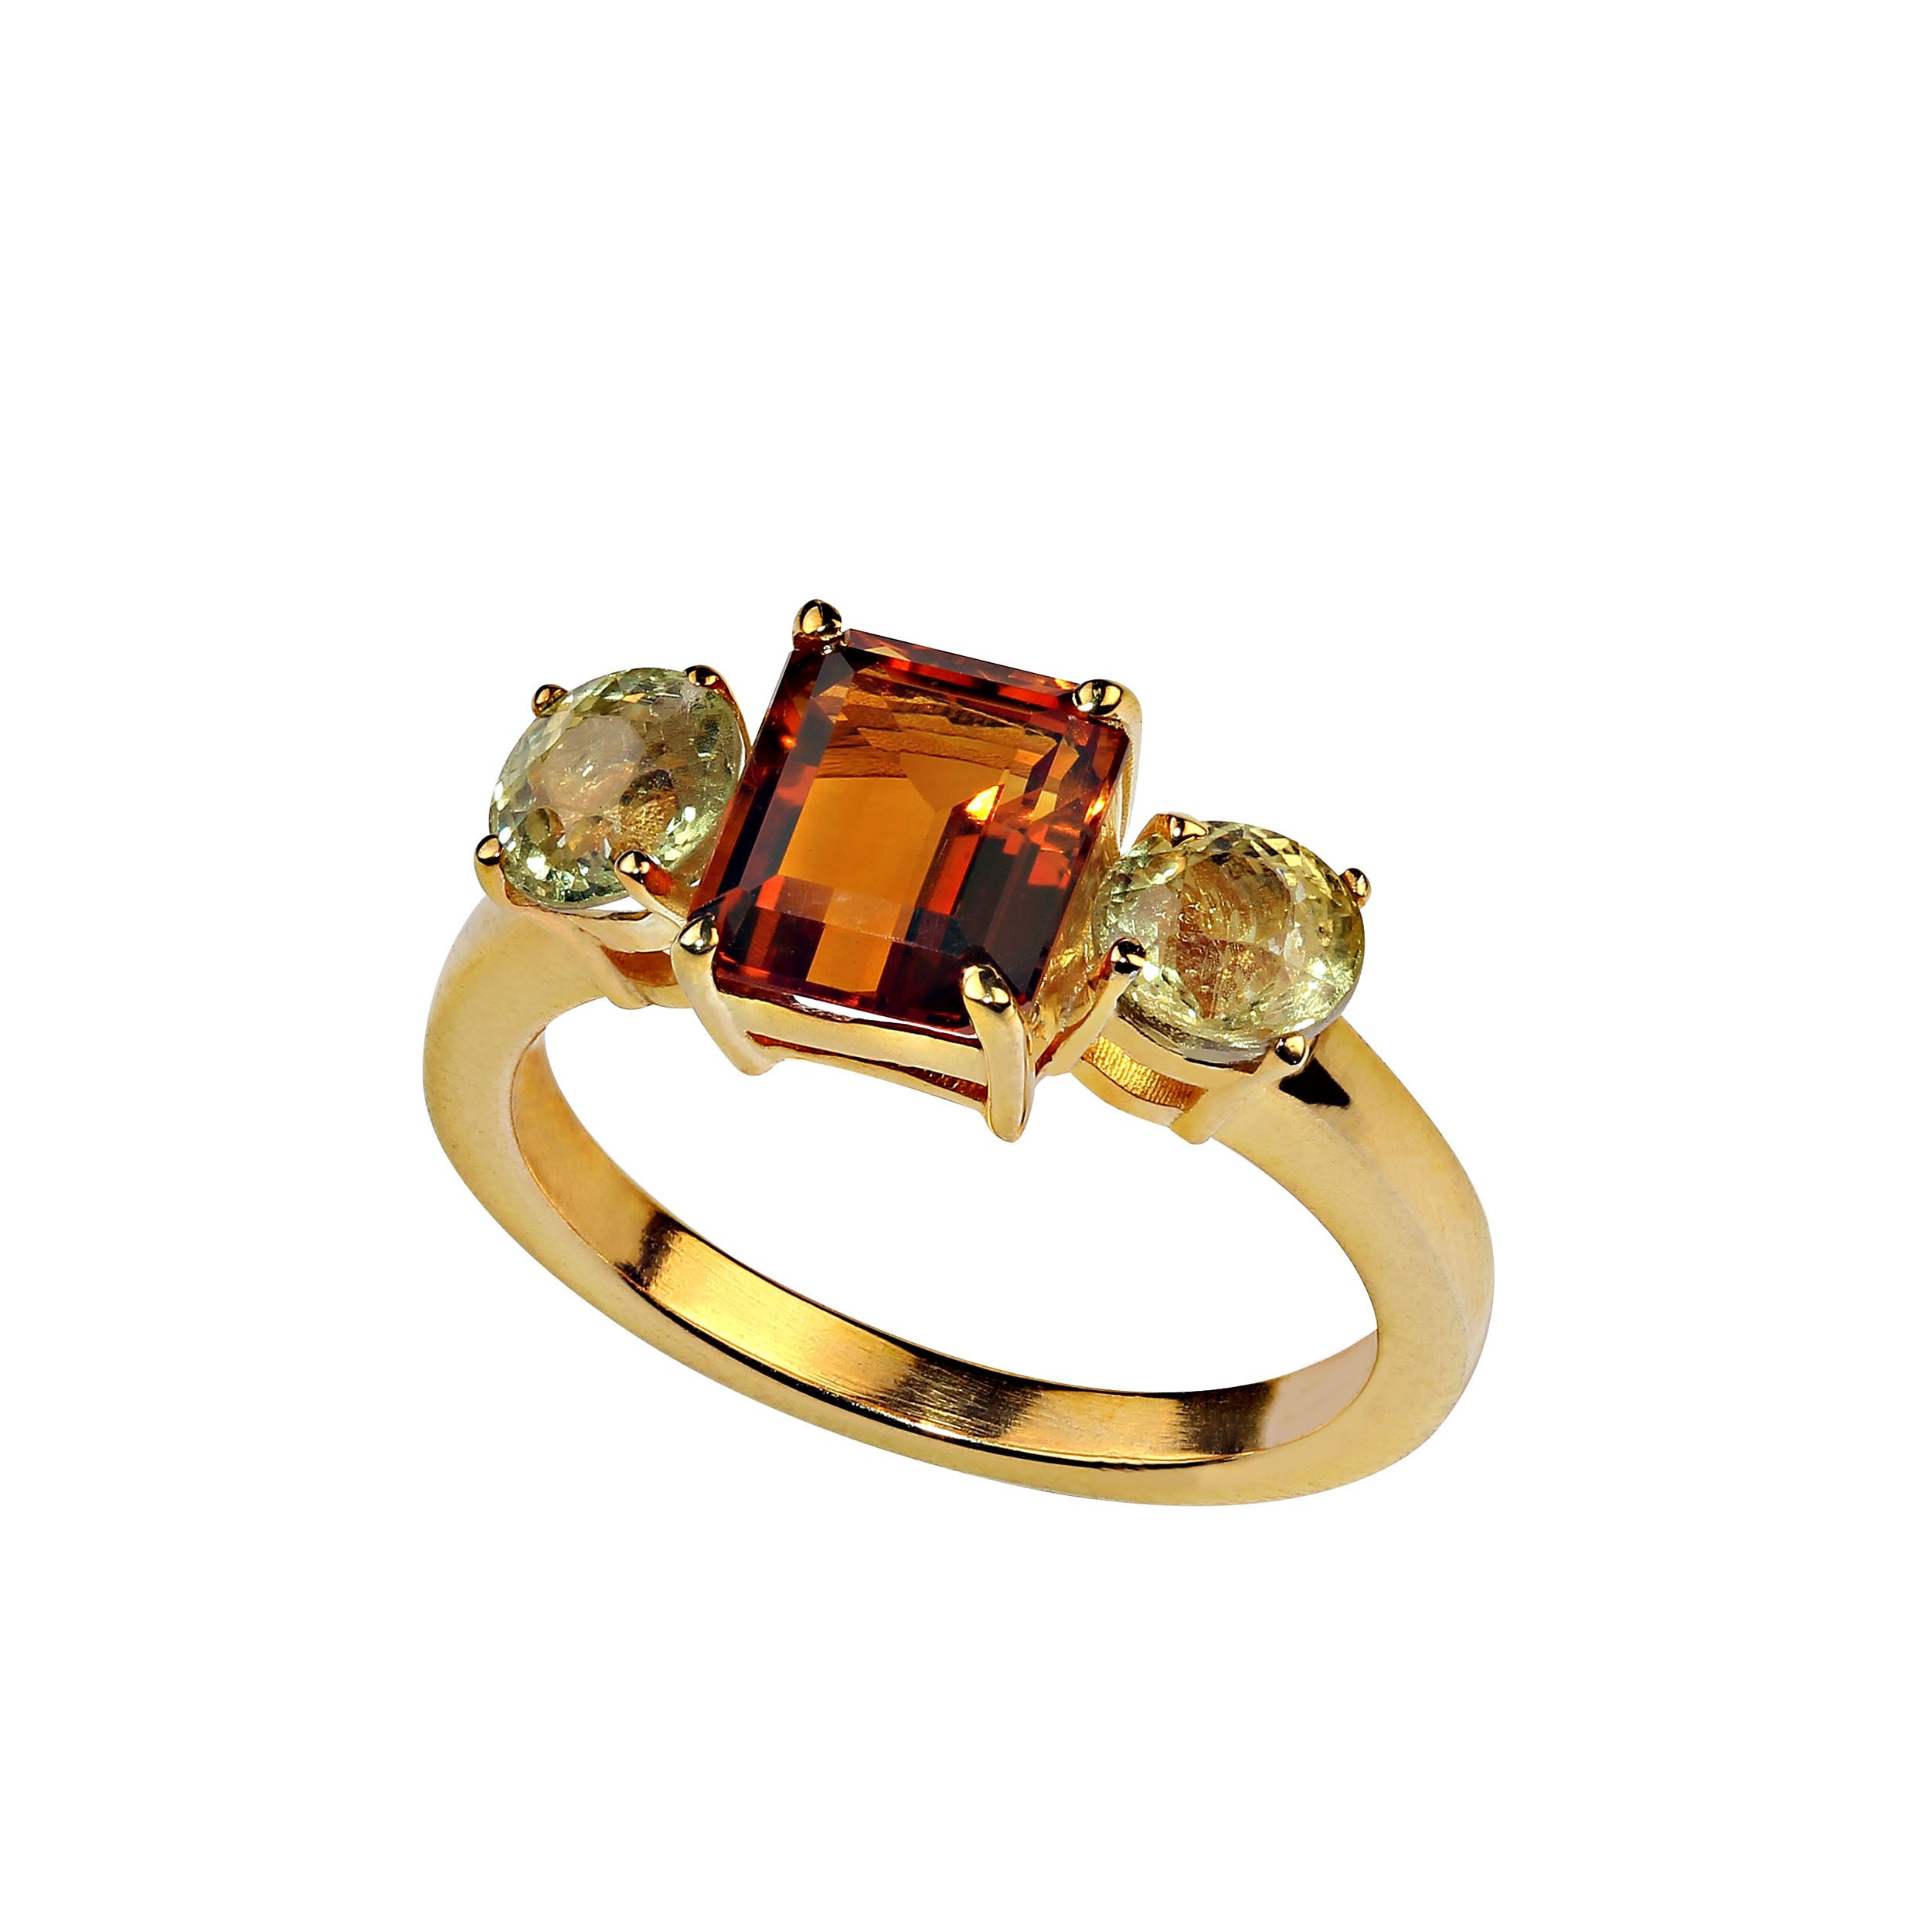 Classic 3 Stone Ring featuring gorgeous Citrine and rare, unusal Mali green Garnets.  This unique ring won't be found anywhere else. The citrine is 2.23ct and the two garnets total 1.99cts.  The ring is gold rhodium over sterling silver.The ancient